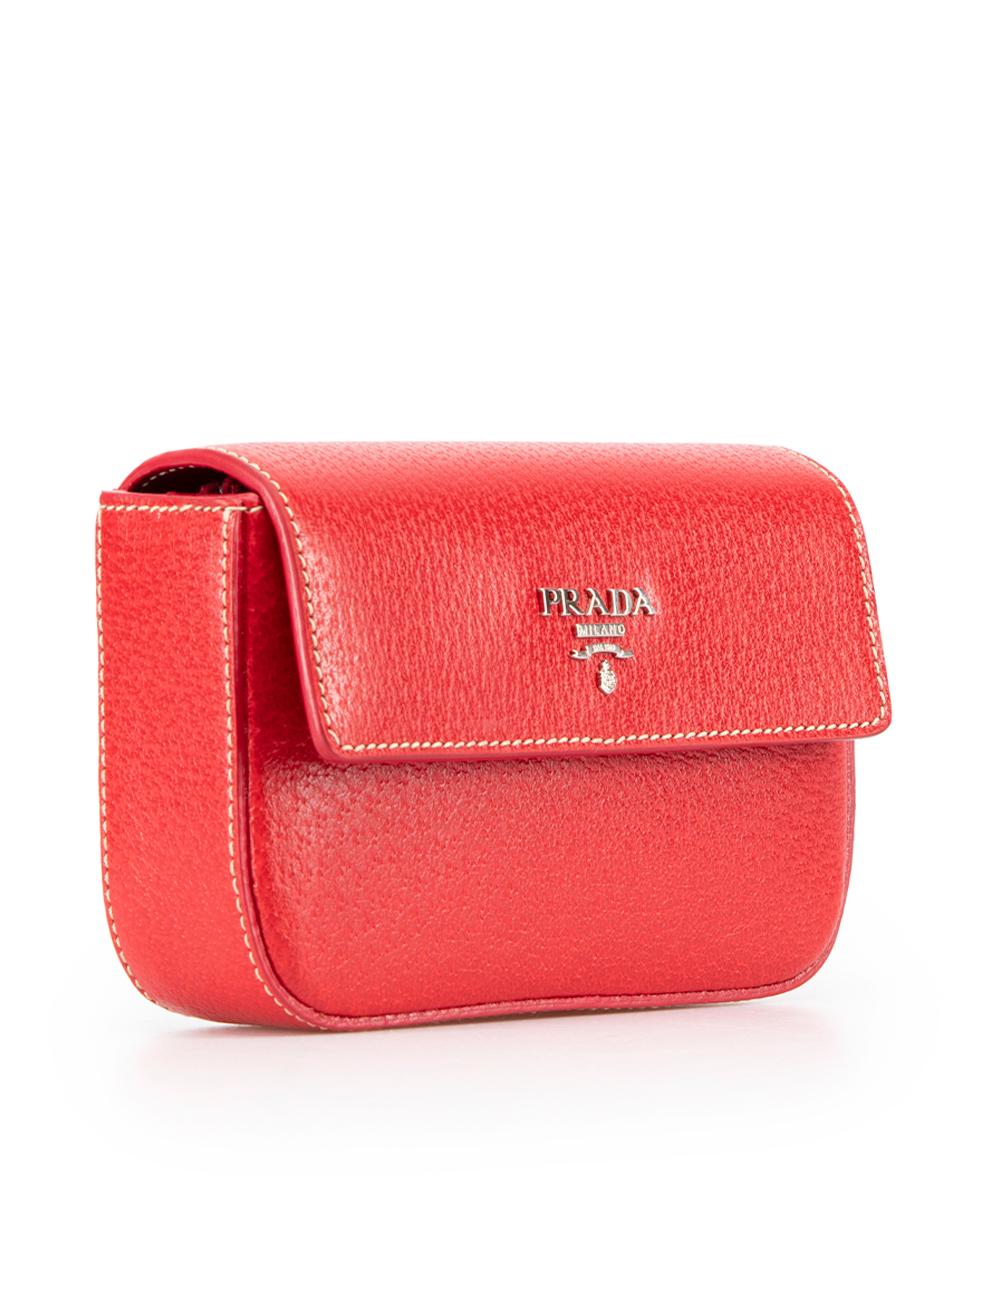 CONDITION is Never Worn. No visible wear to pouch is evident on this used Prada designer resale item. This item comes with original box.
  
  Details
  Red
  Leather
  Mini pouch
  Flap with magnetic button fastening
  2x Main compartments
  1x Zip